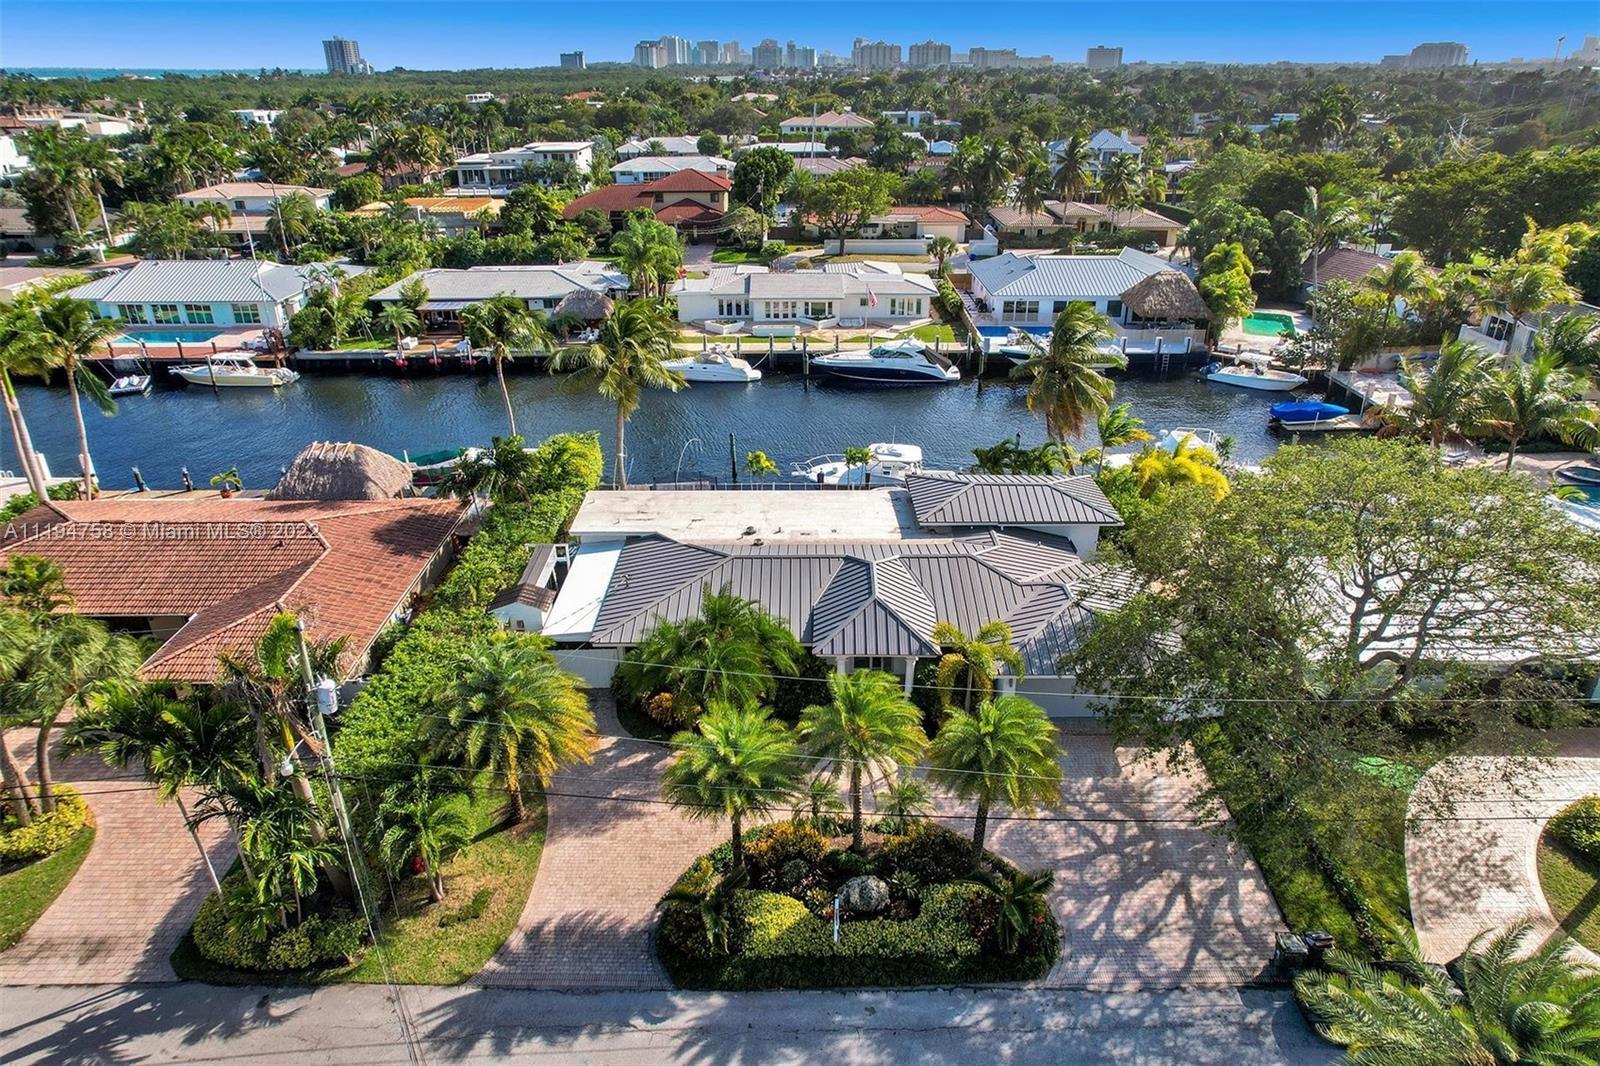 Modern Coral Ridge waterfront home with spectacular views of the coast. This boaters paradise includ